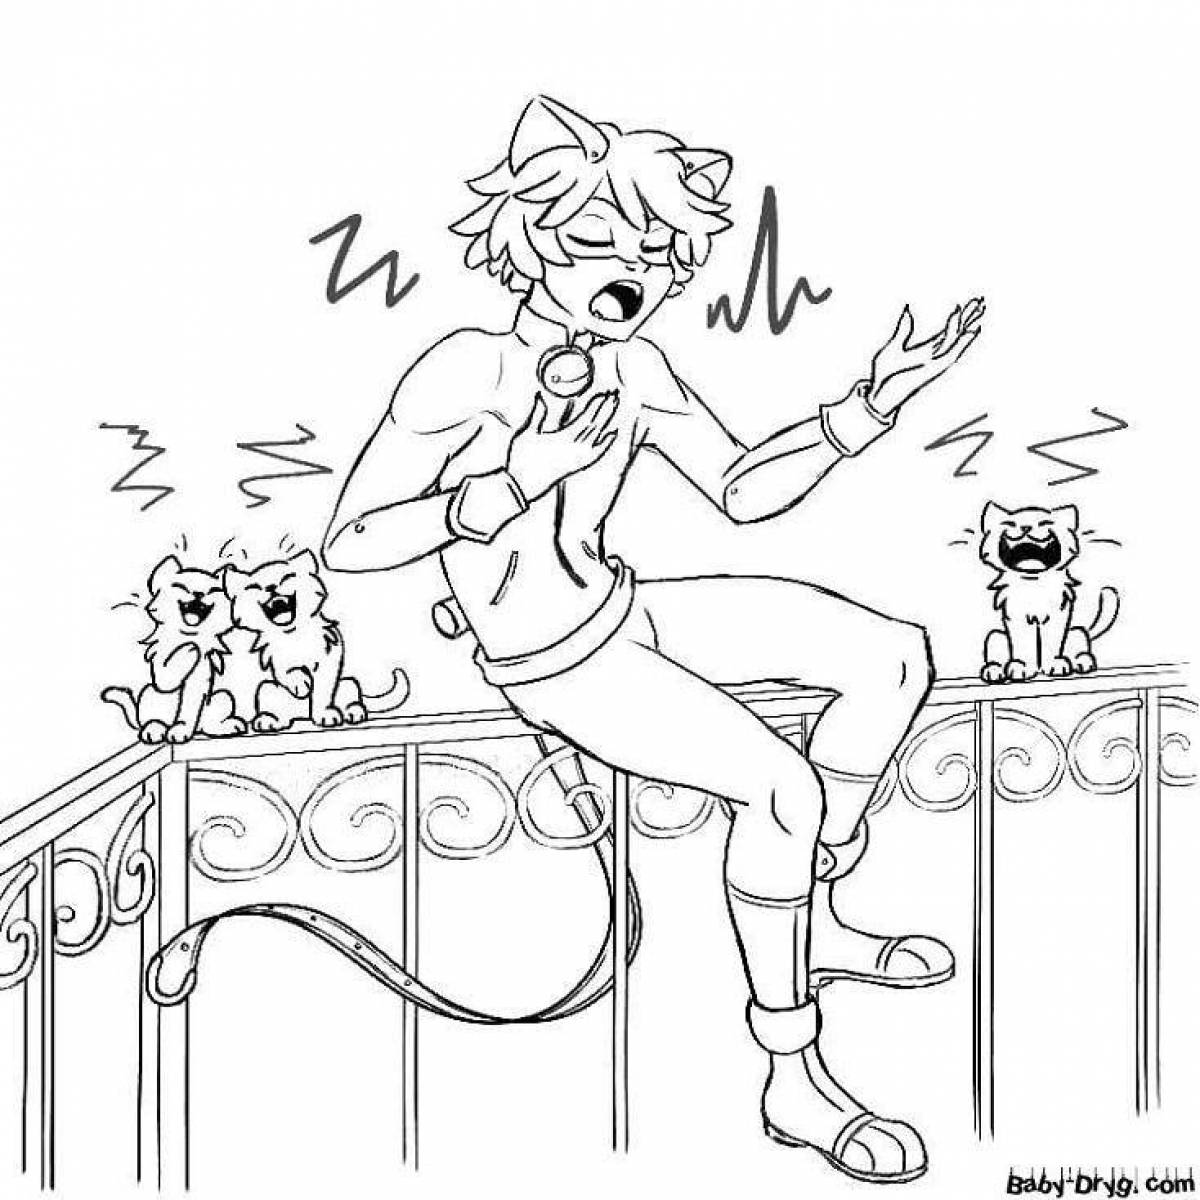 Fancy cat lady coloring page